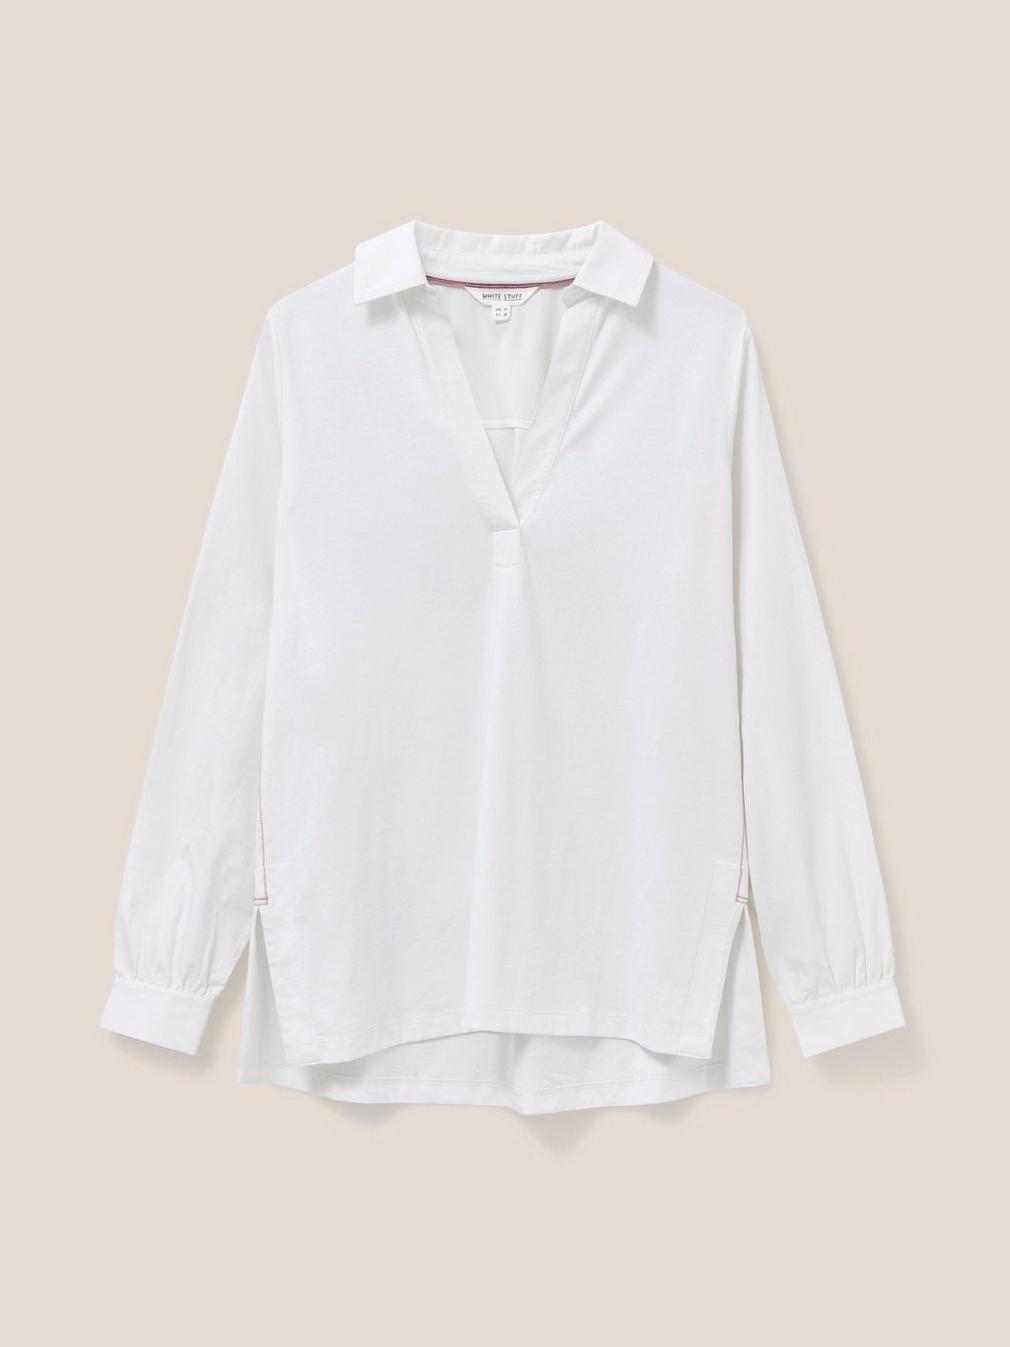 Fran Long Sleeve Shirt in BRIL WHITE - FLAT FRONT